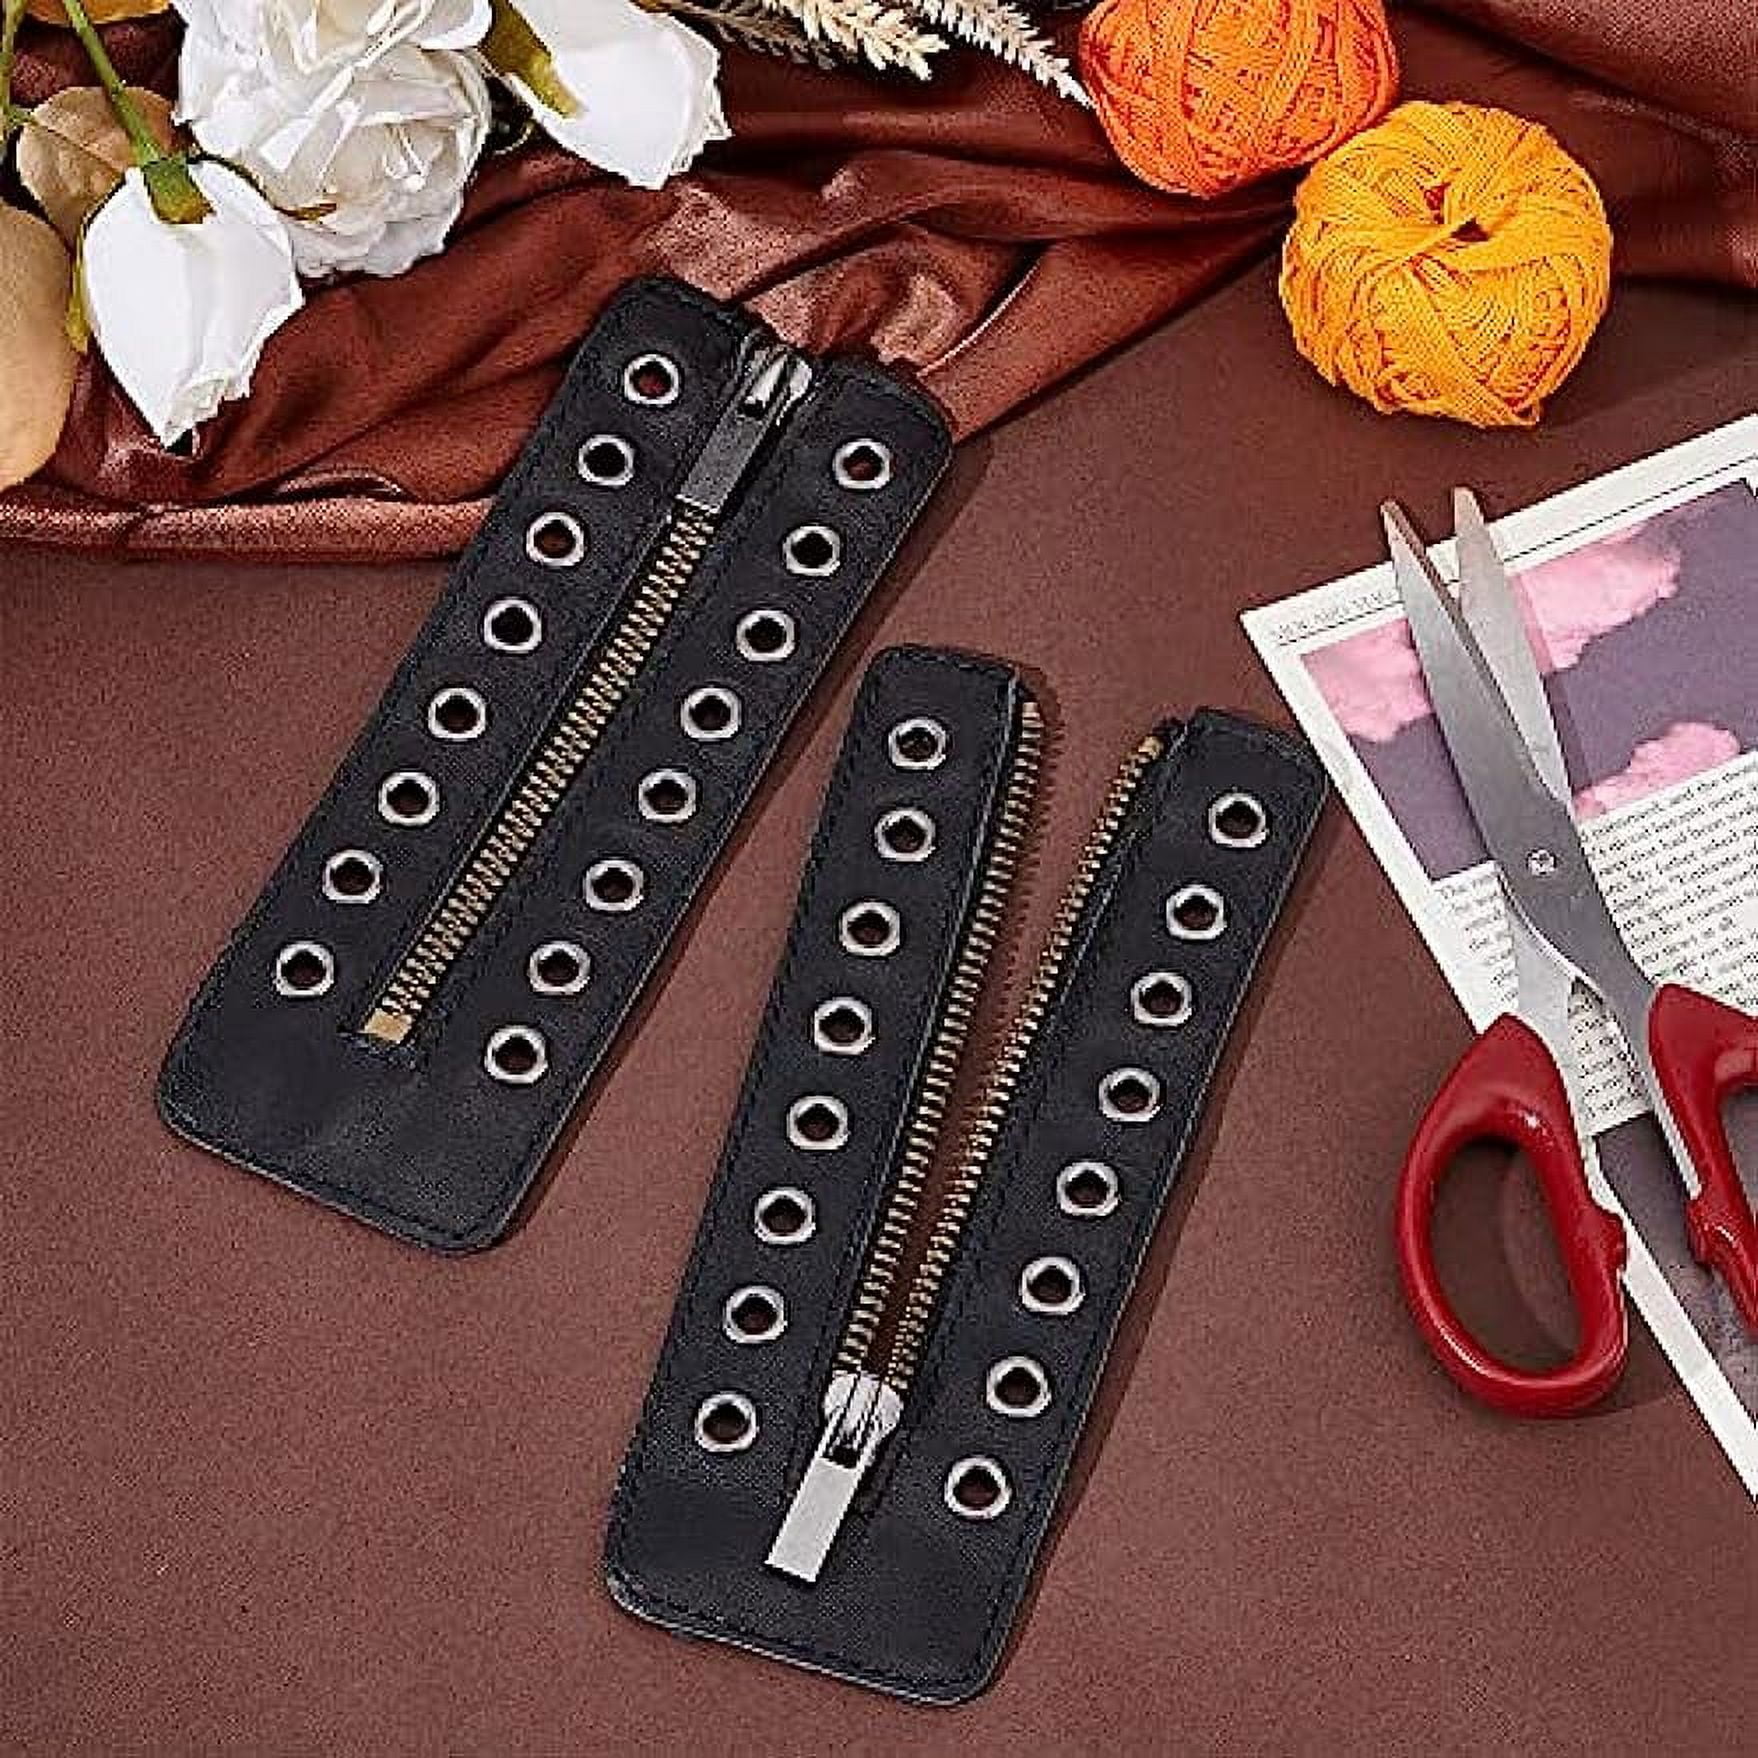 1 Pair 16 hole Leather Lace-up Boot Zipper Inserts for Sports Shoes  157x55mm